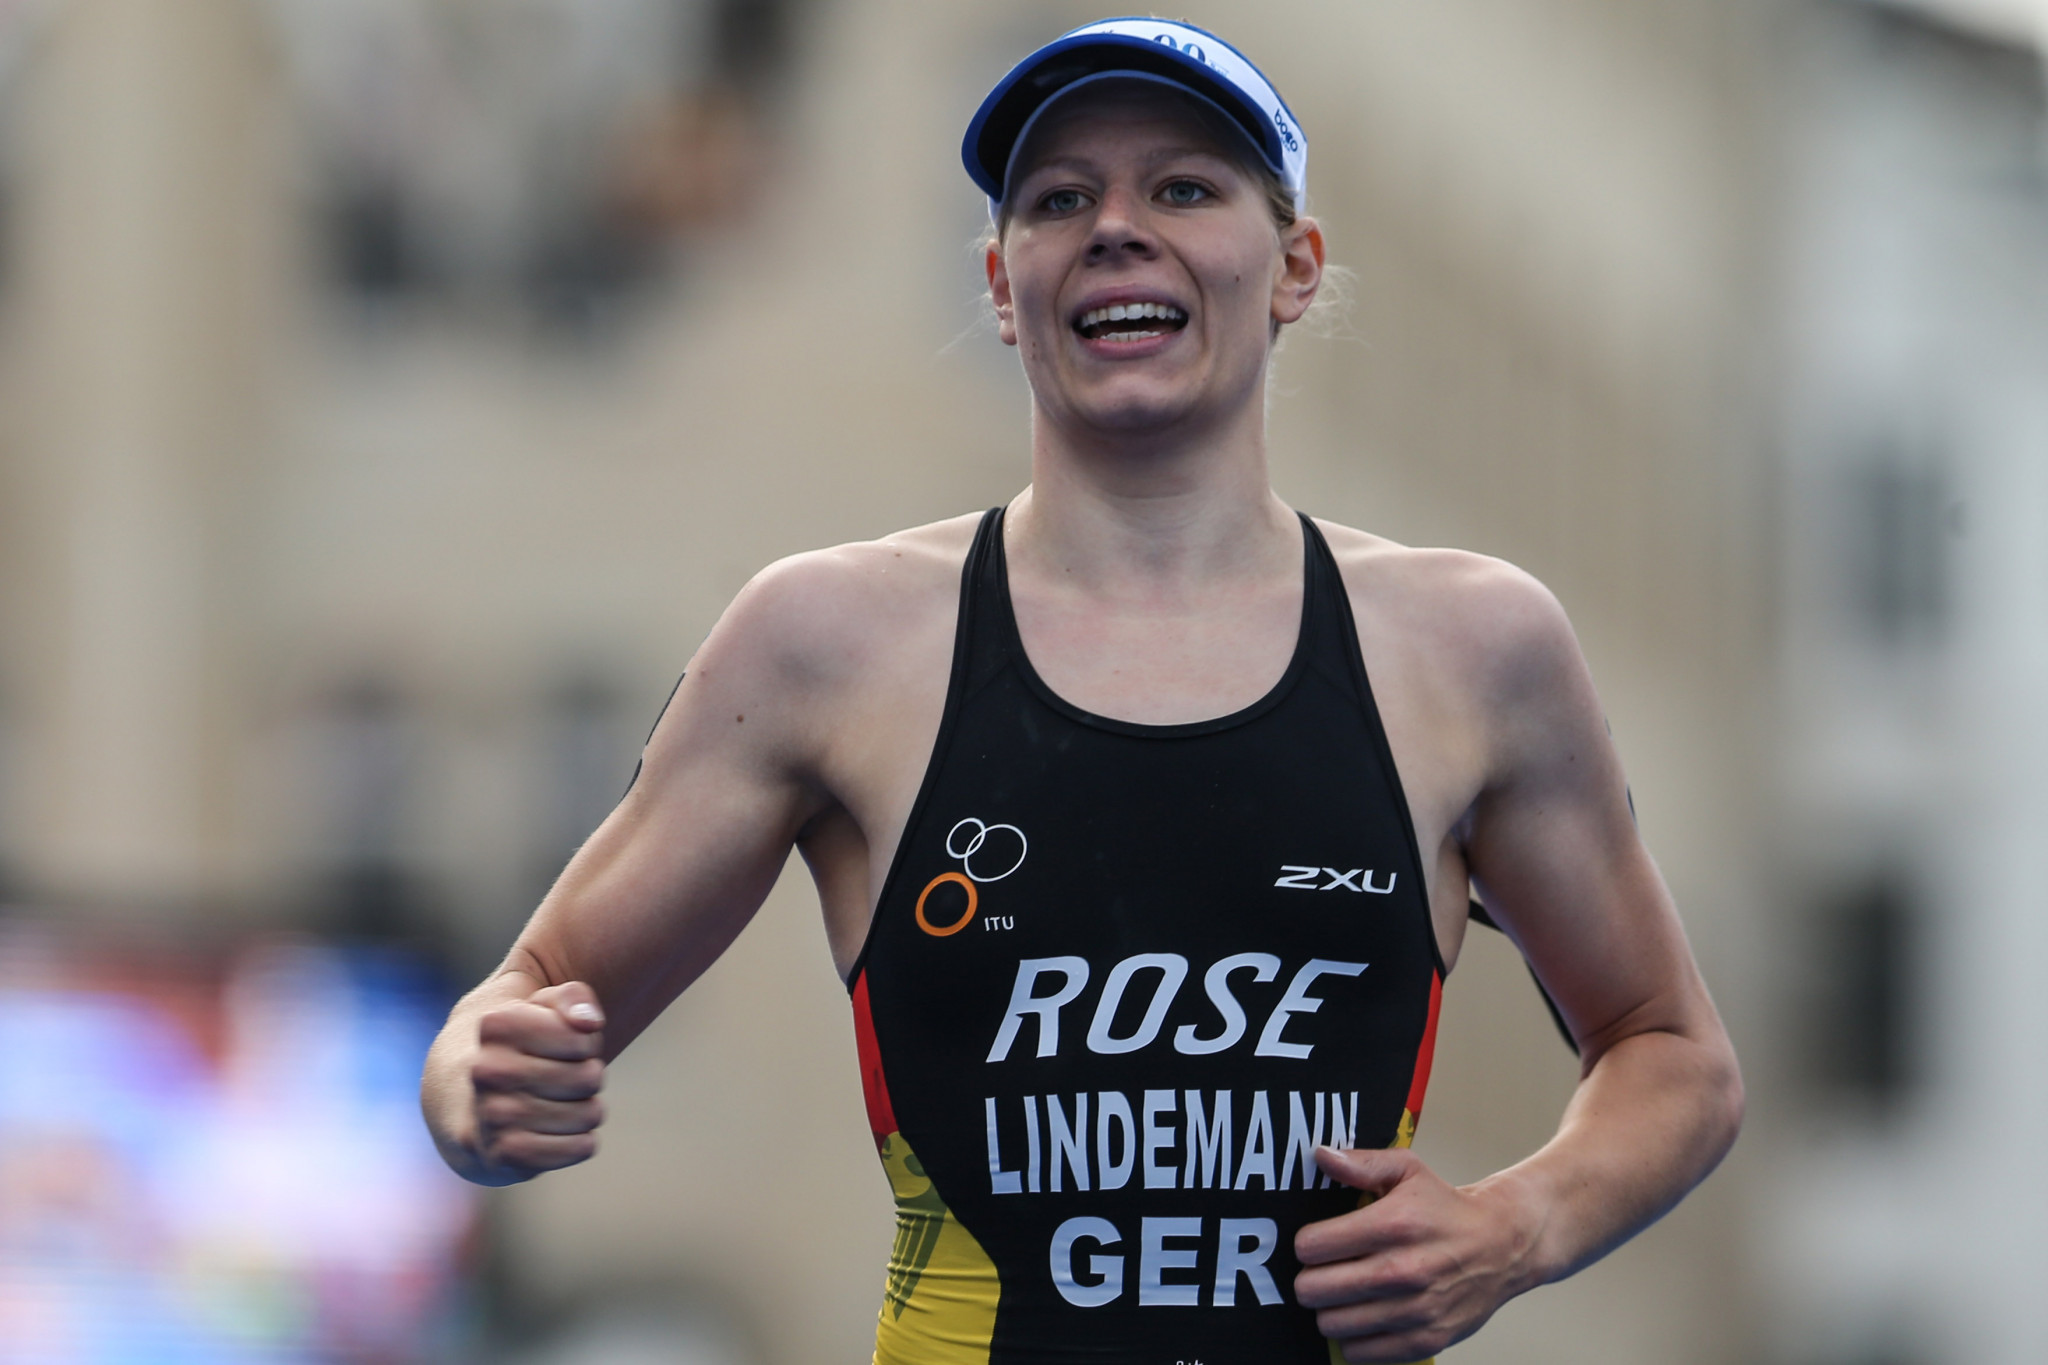 Laura Lindemann helped Germany to win the mixed relay race in Leeds ©Getty Images